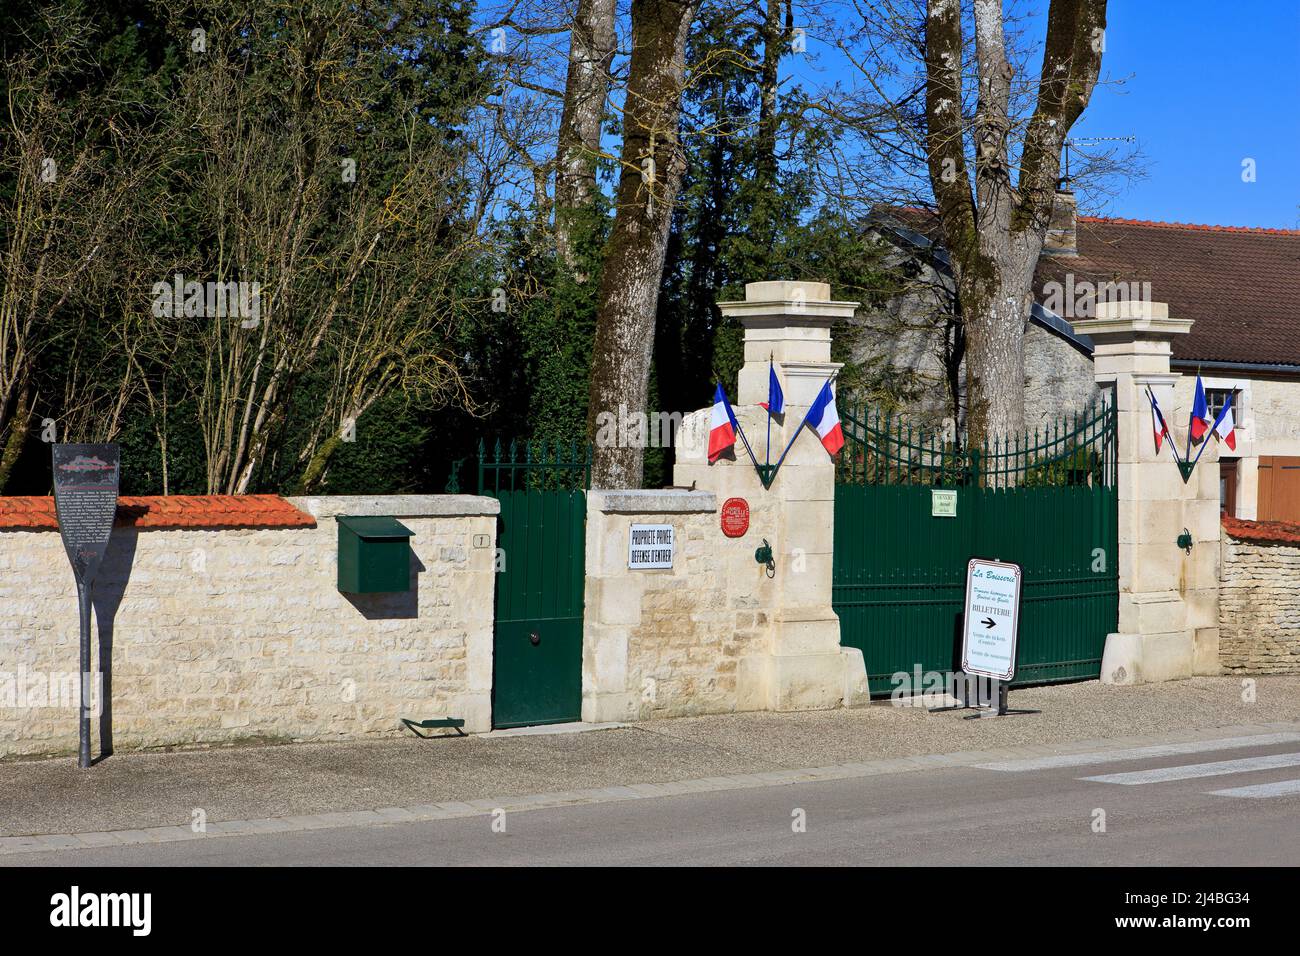 The entrance gate to 'La Boisserie', the former home of French President Charles de Gaulle and his family in Colombey-les-Deux-Eglises, France Stock Photo